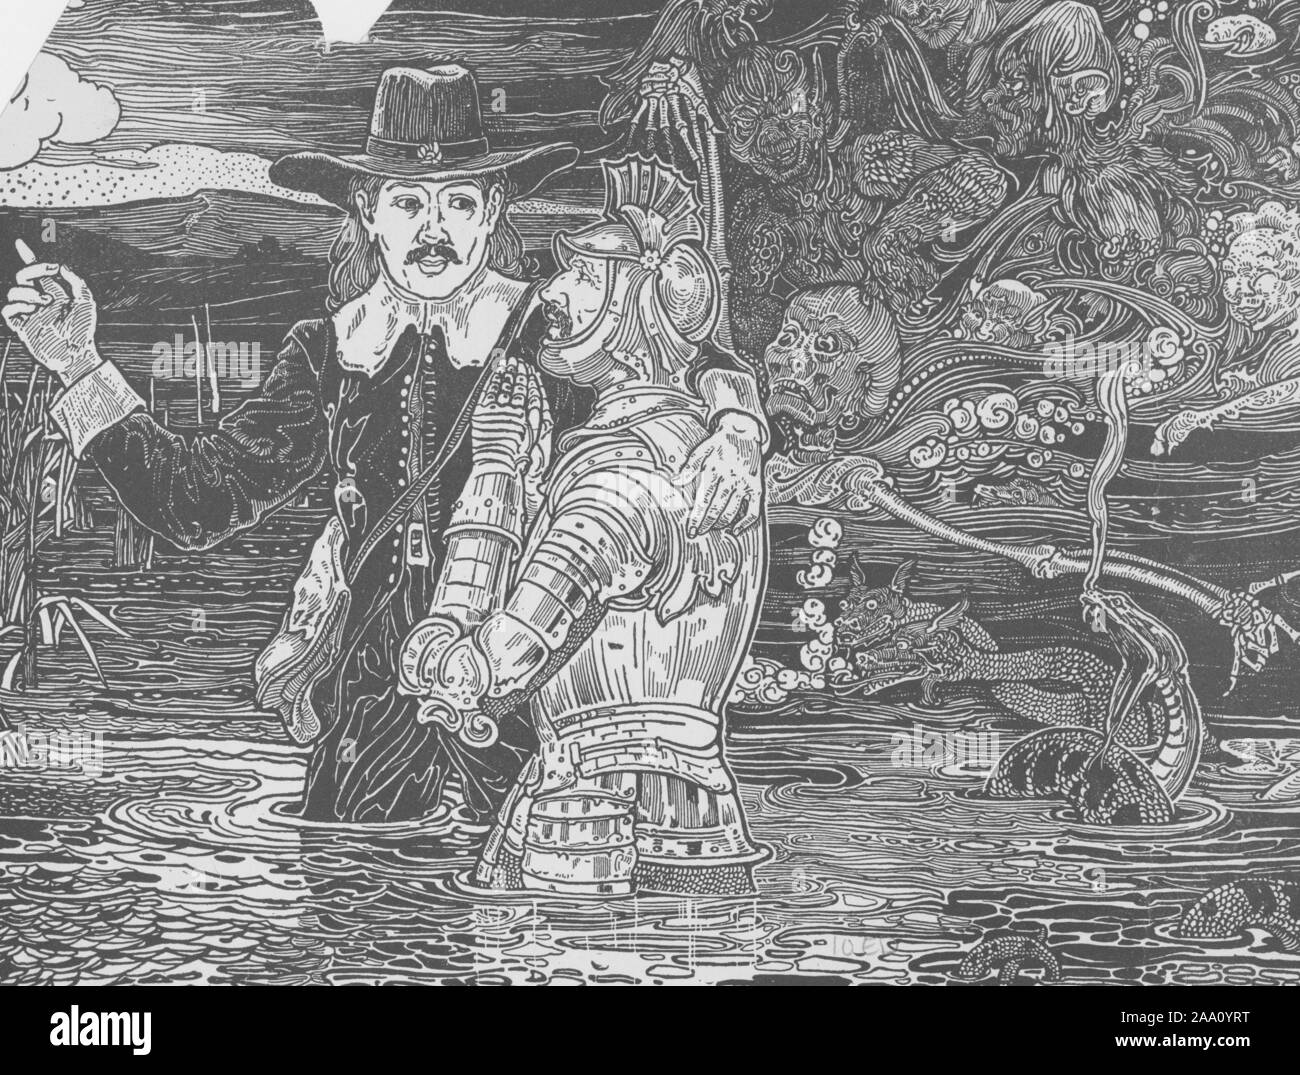 Engraving of a scene from the book 'Pilgrim's Progress' by John Bunyan, featuring Christian and Hopeful crossing a river, surrounded by snakes, skeletons and monsters, illustrated by the Rhead Brothers, published by The Century Co, 1898. From the New York Public Library. () Stock Photo